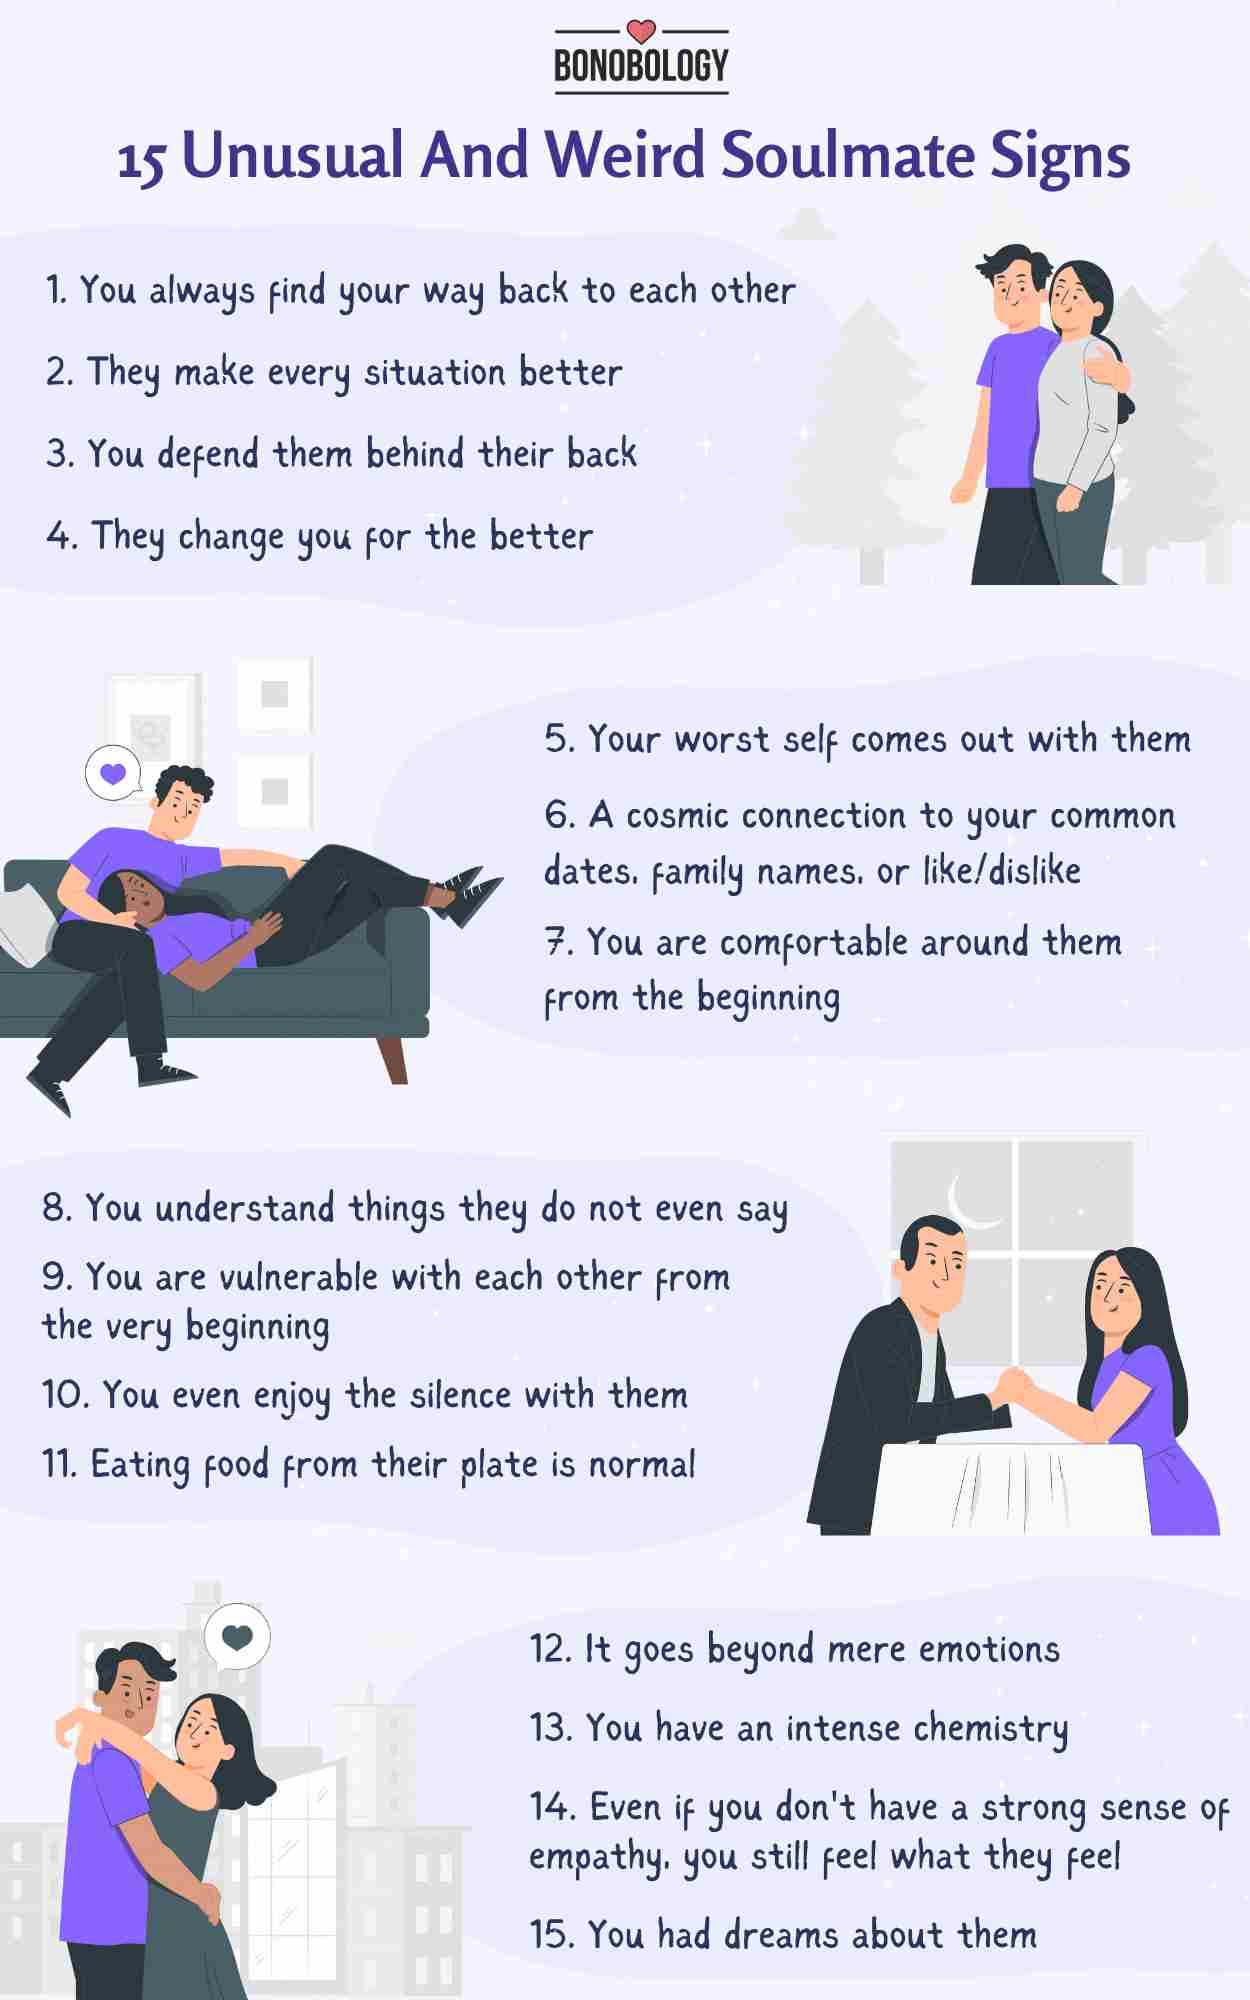 infographic on weird soulmate signs